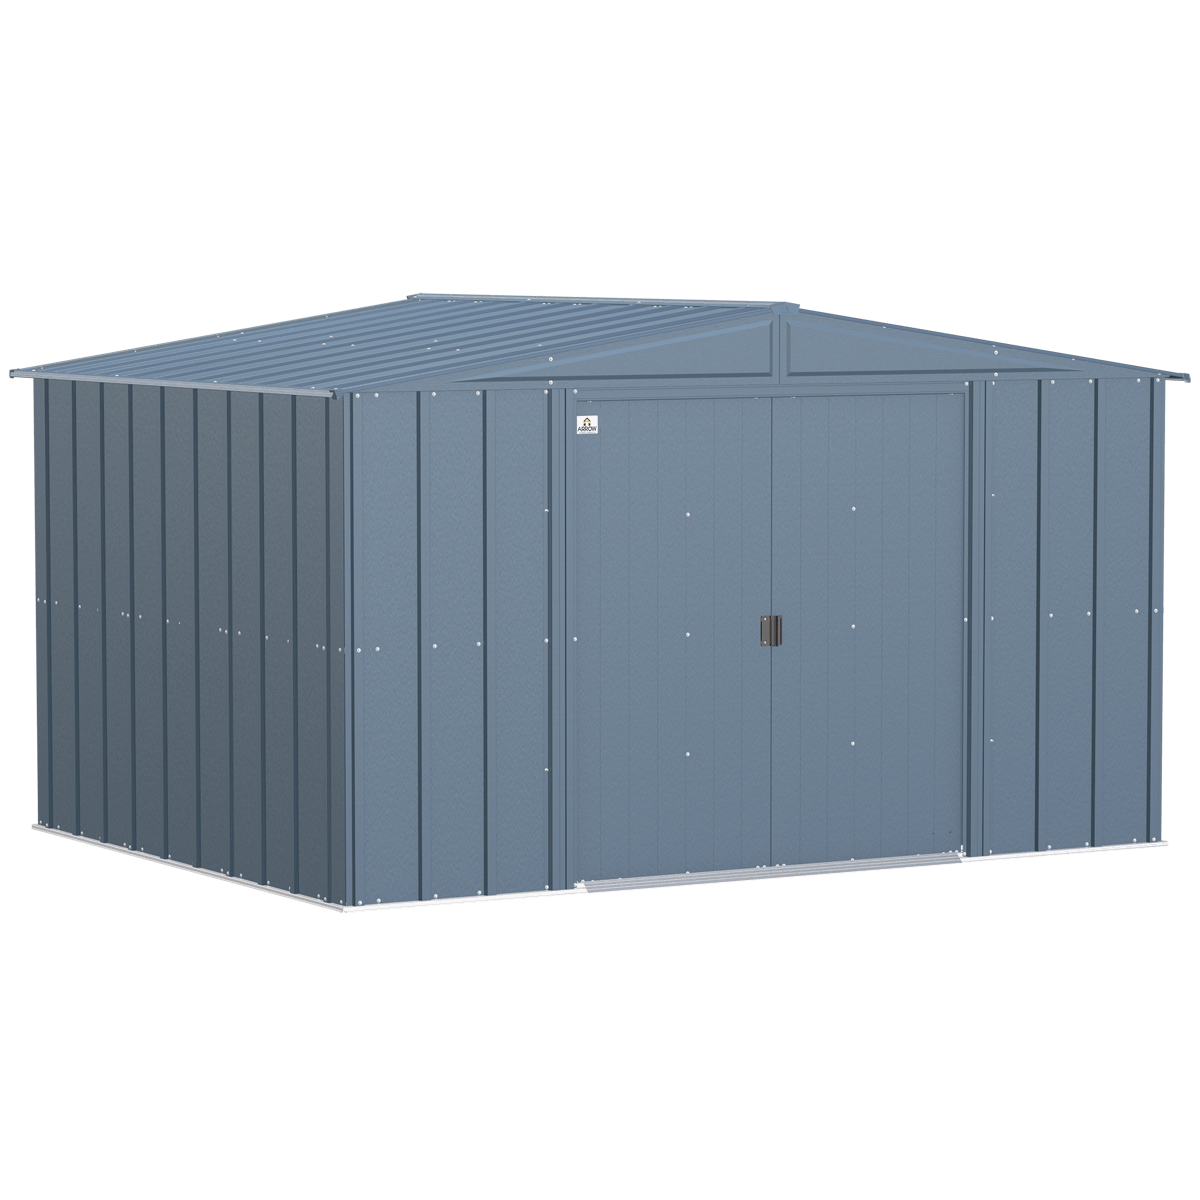 Classic 10' X 8' Outdoor Padlockable Steel Storage Shed Buil